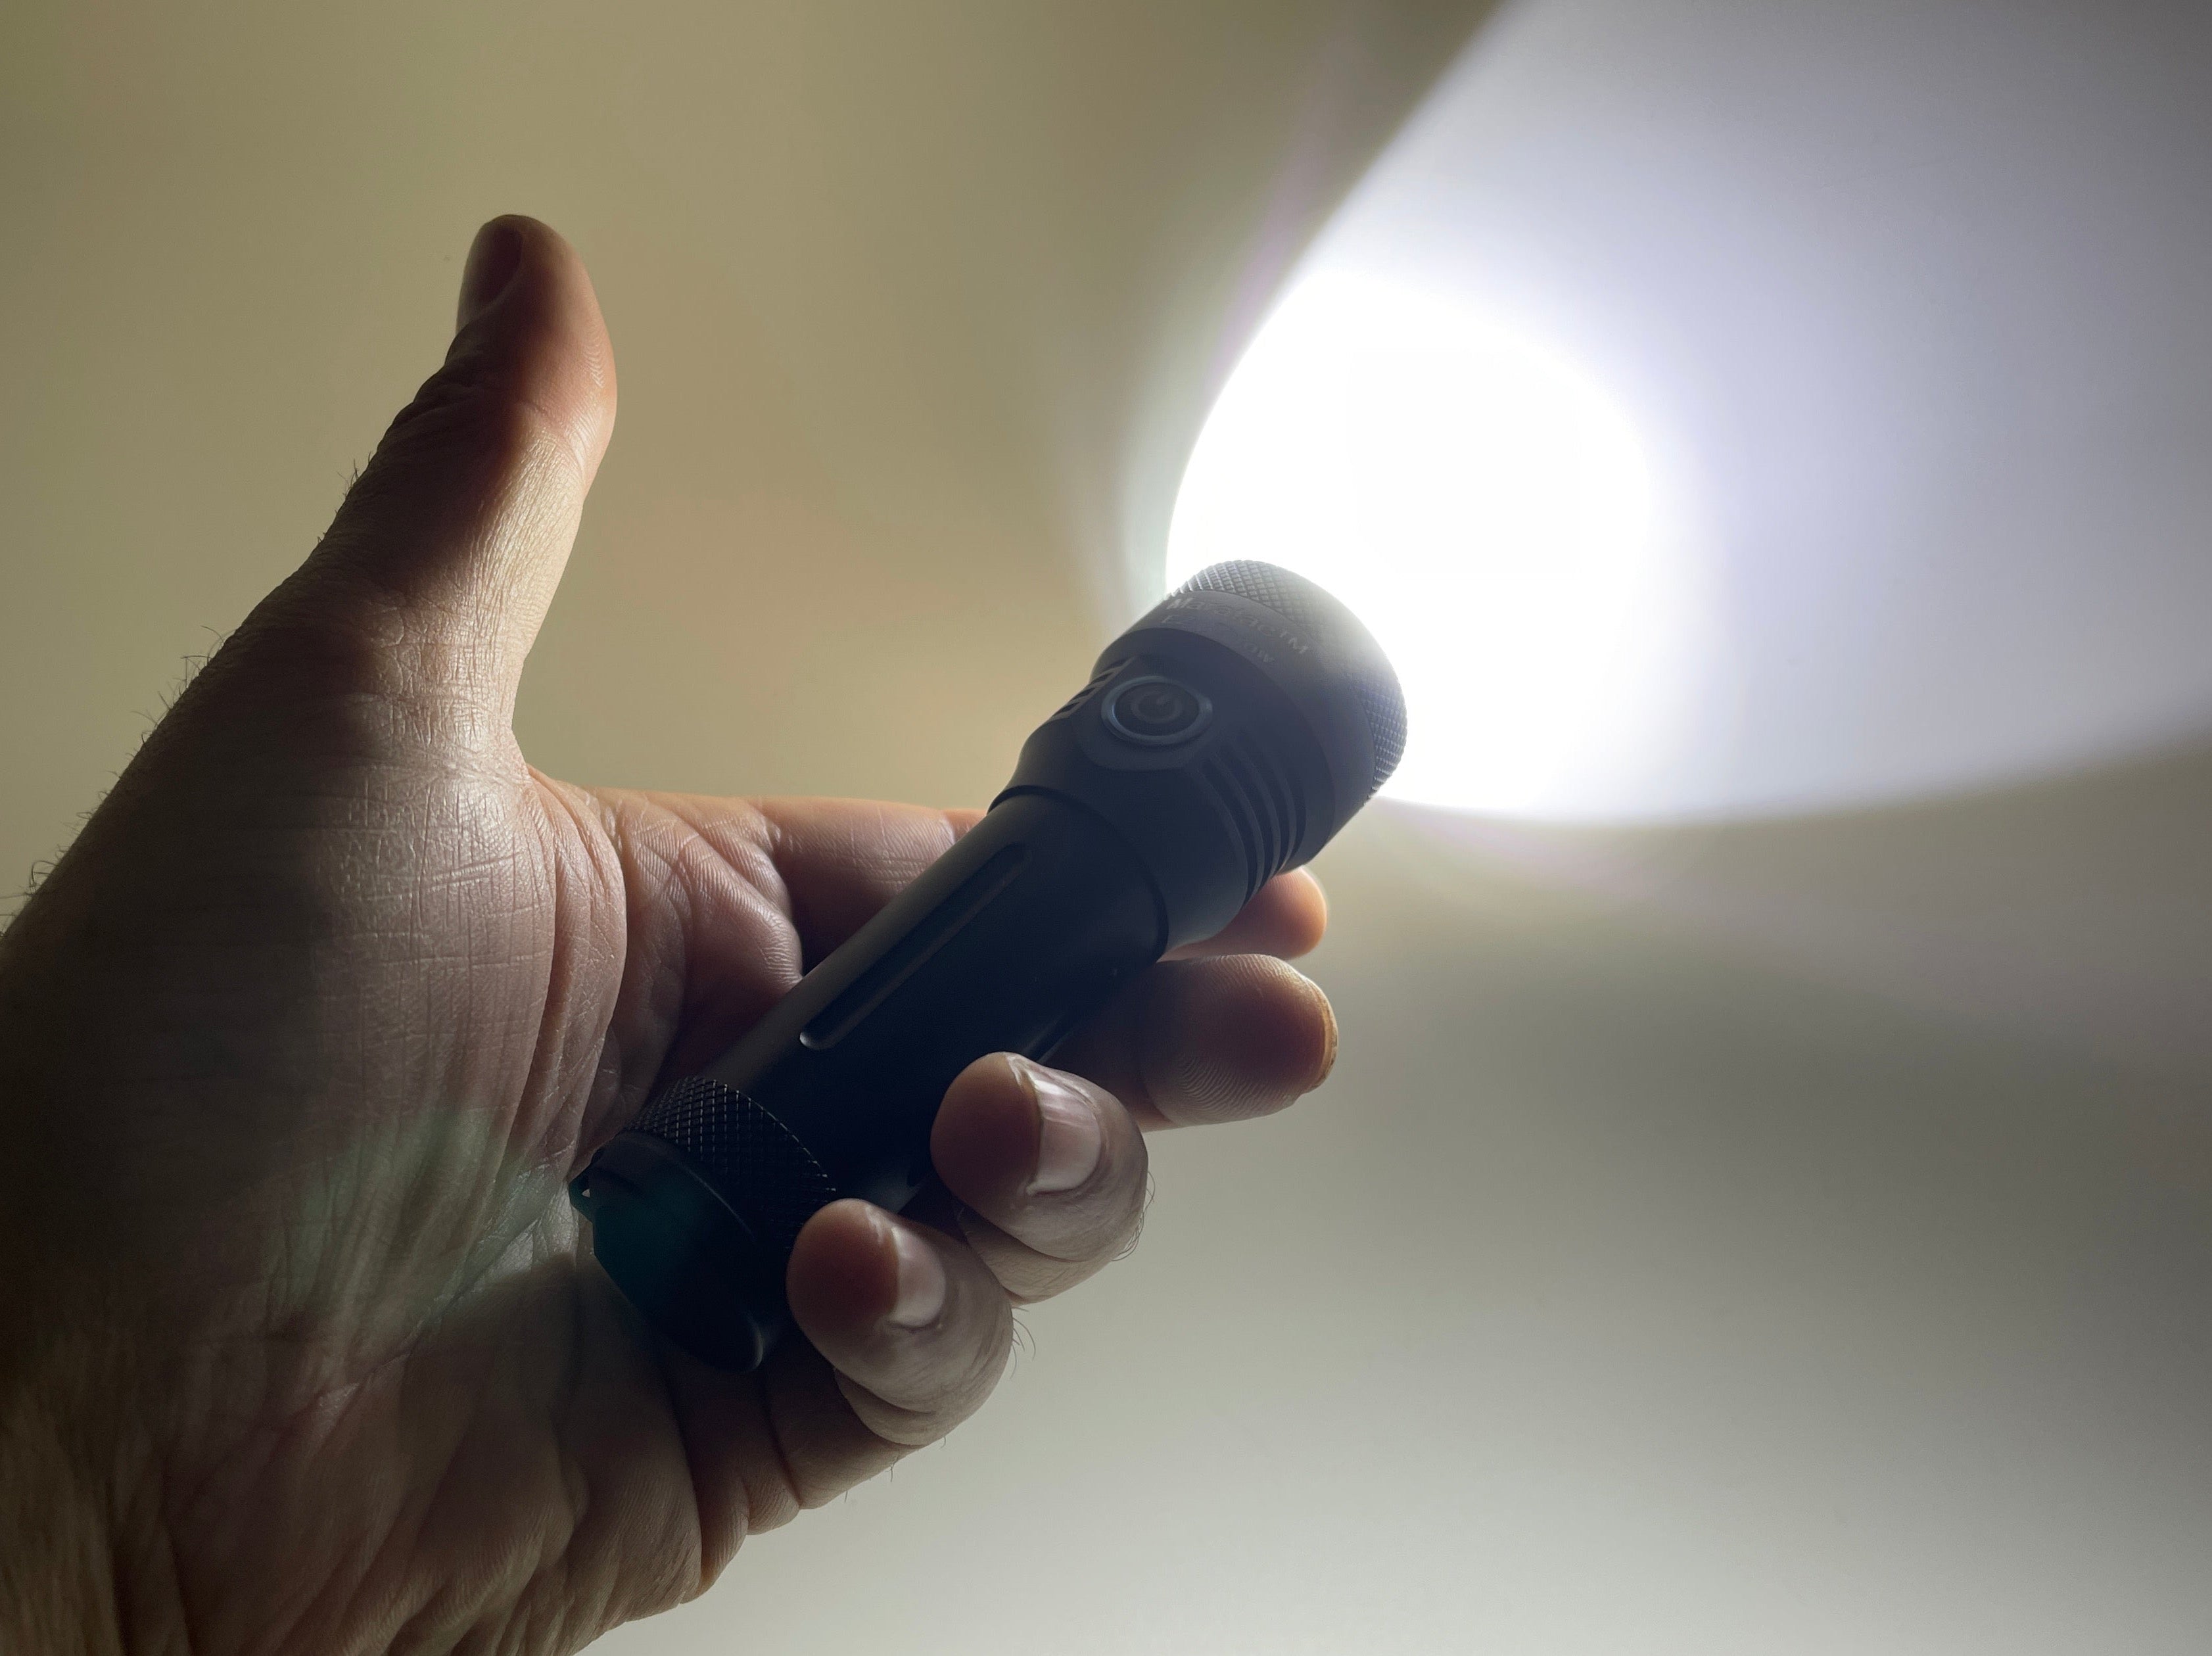 EZ - Throw 18650 / 21700 Flashlight by Maratac ( + Built In Charger )